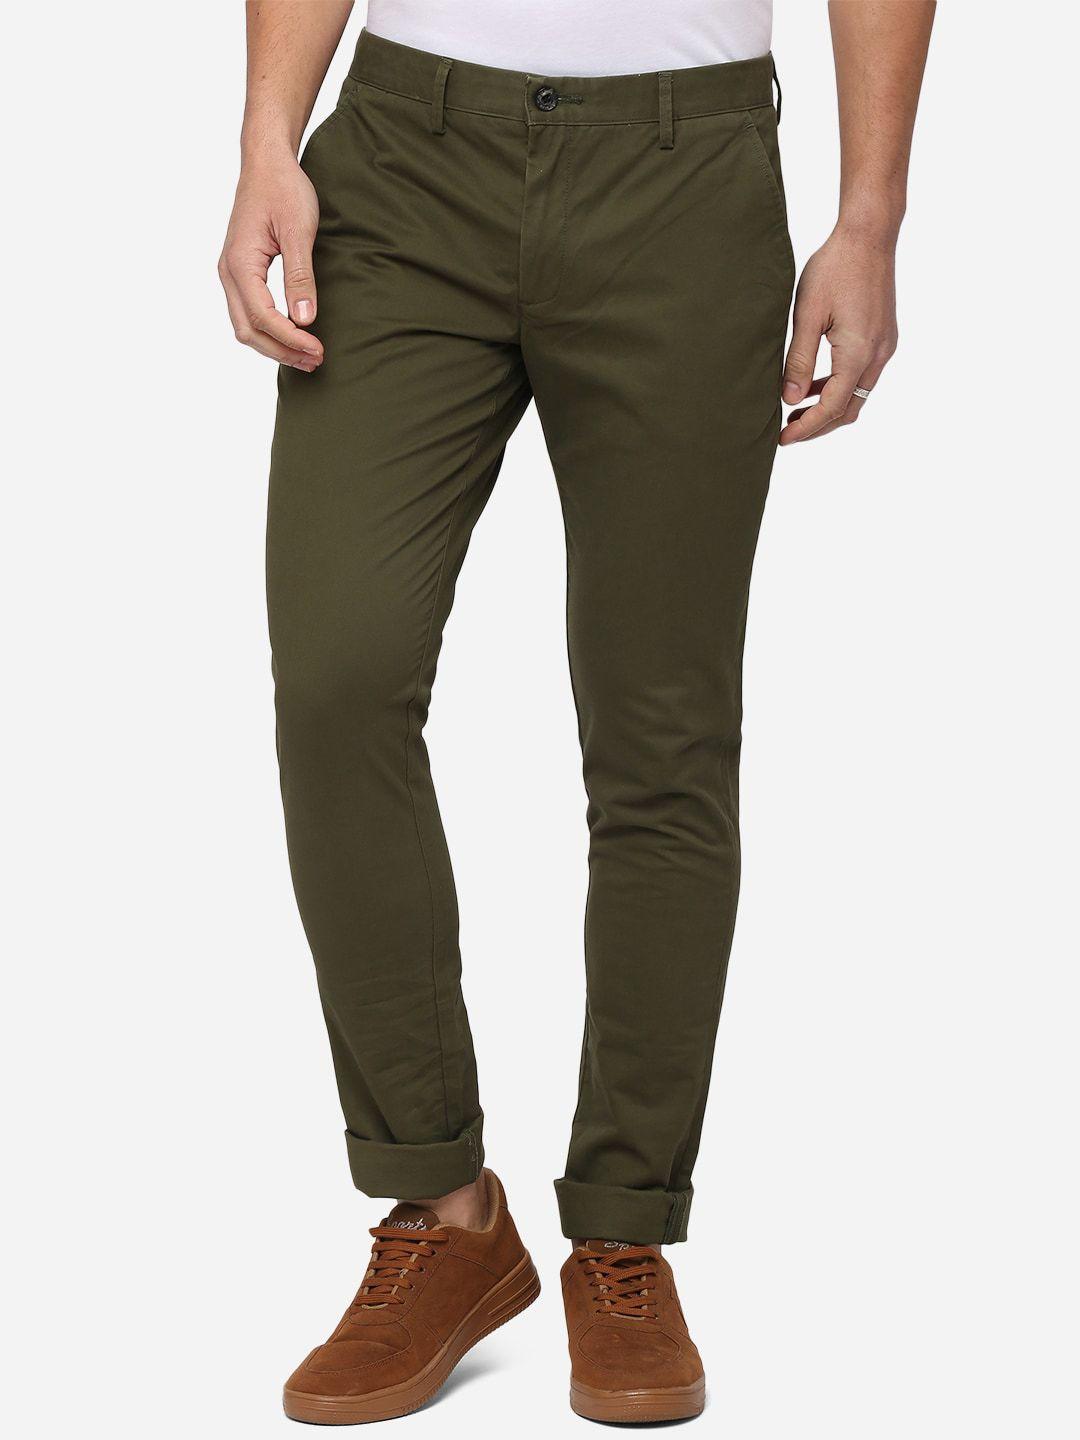 jade-blue-men-olive-green-slim-fit-pure-cotton-trousers